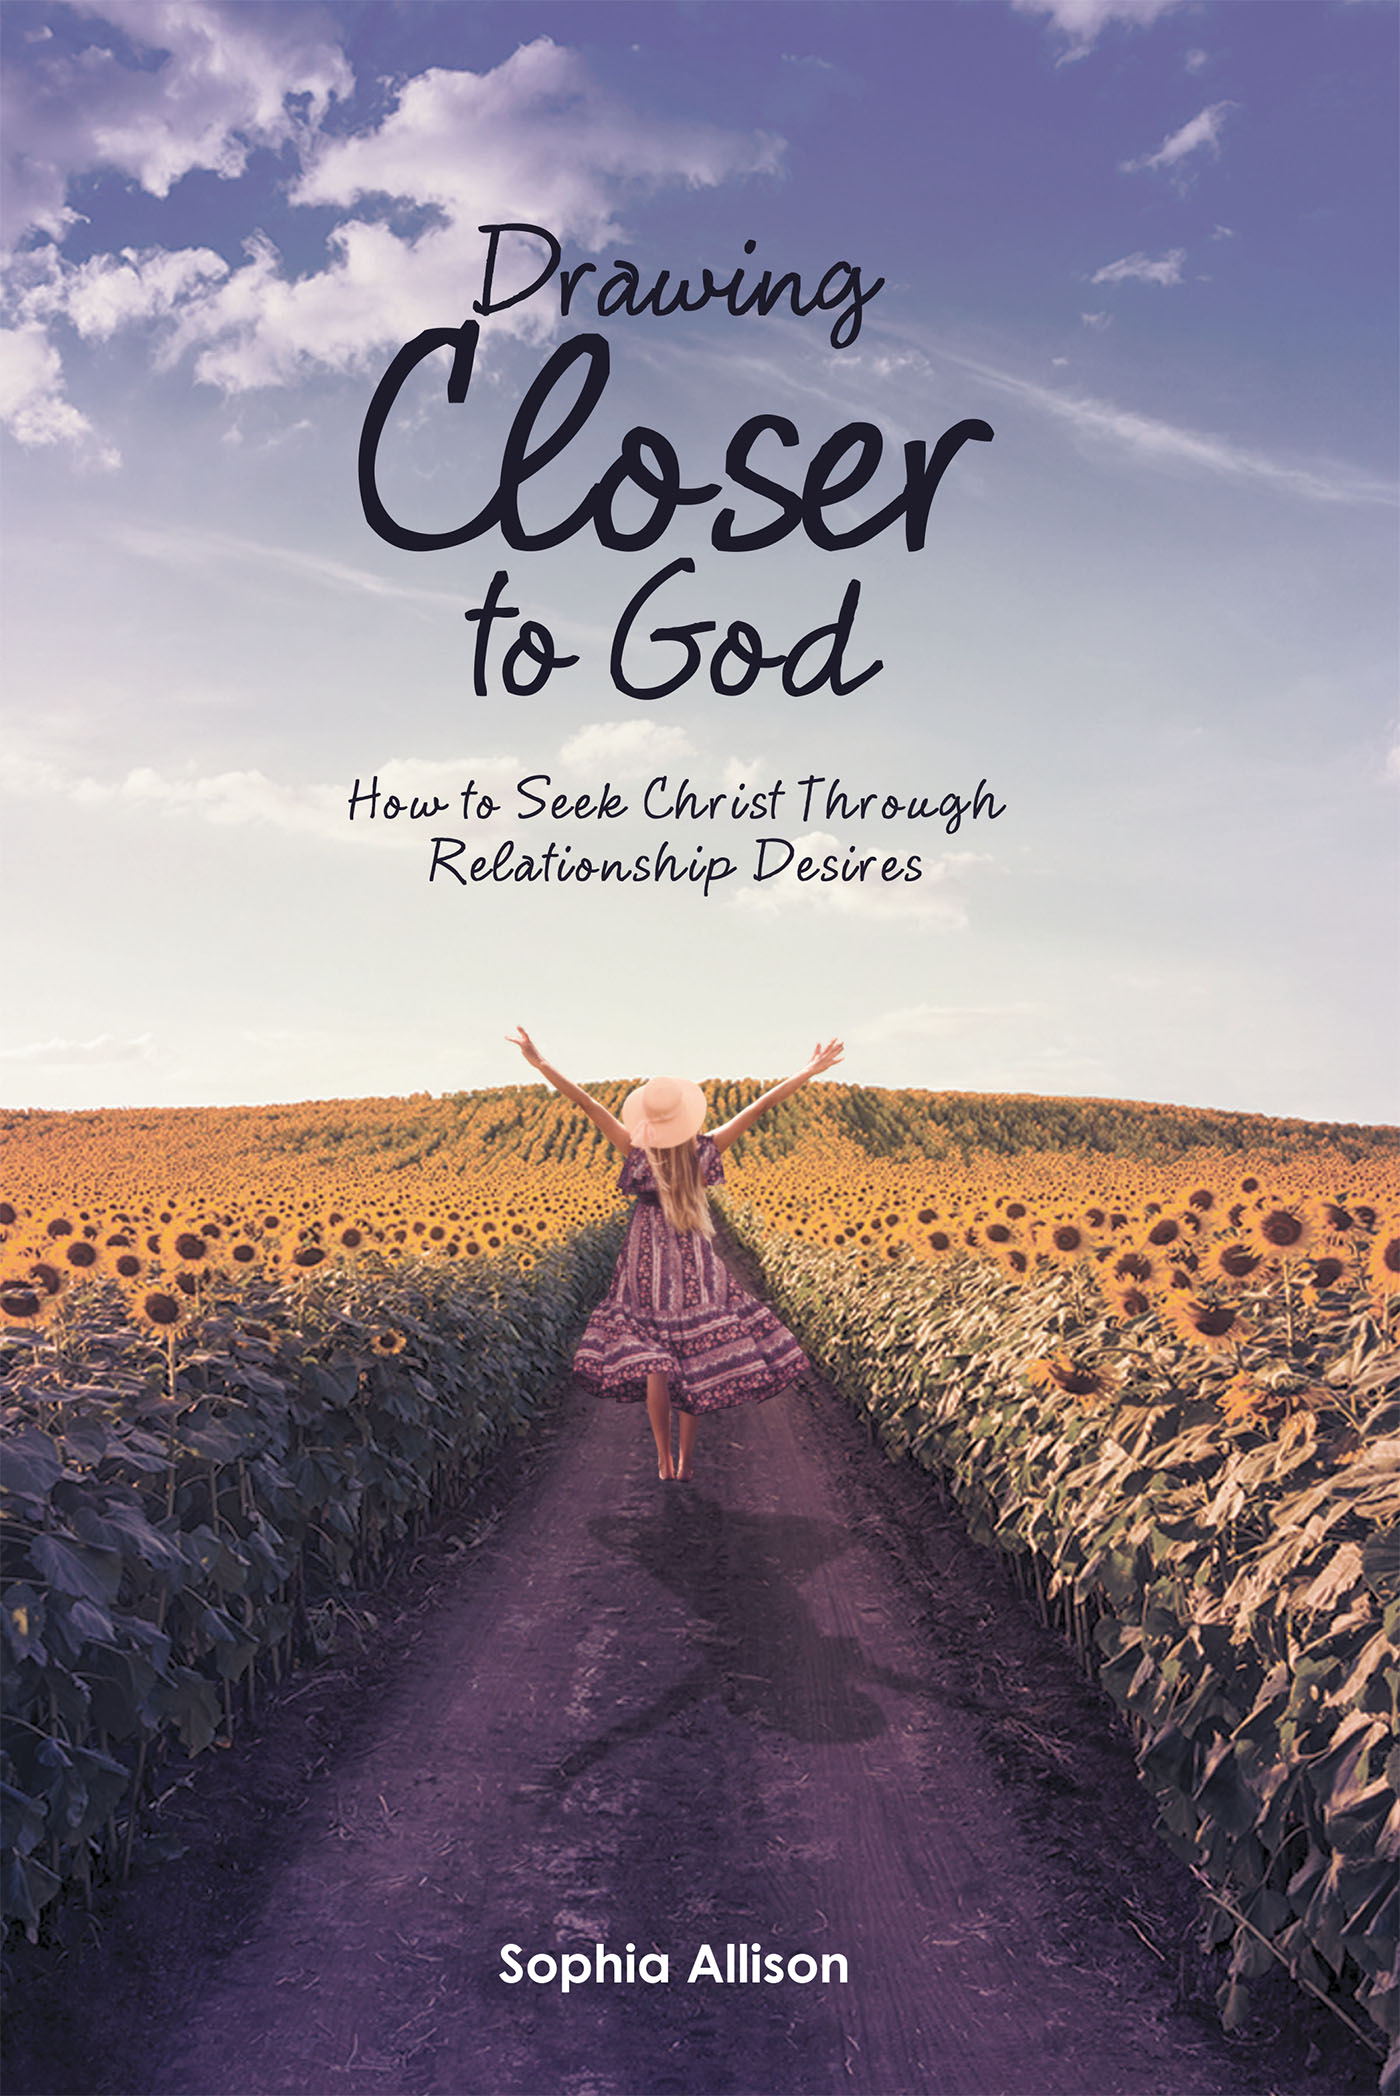 Author Sophia Allison’s New Book, "Drawing Closer to God," is a Thought-Provoking Guide to Build a Relationship with God Through Living a Life of Purity